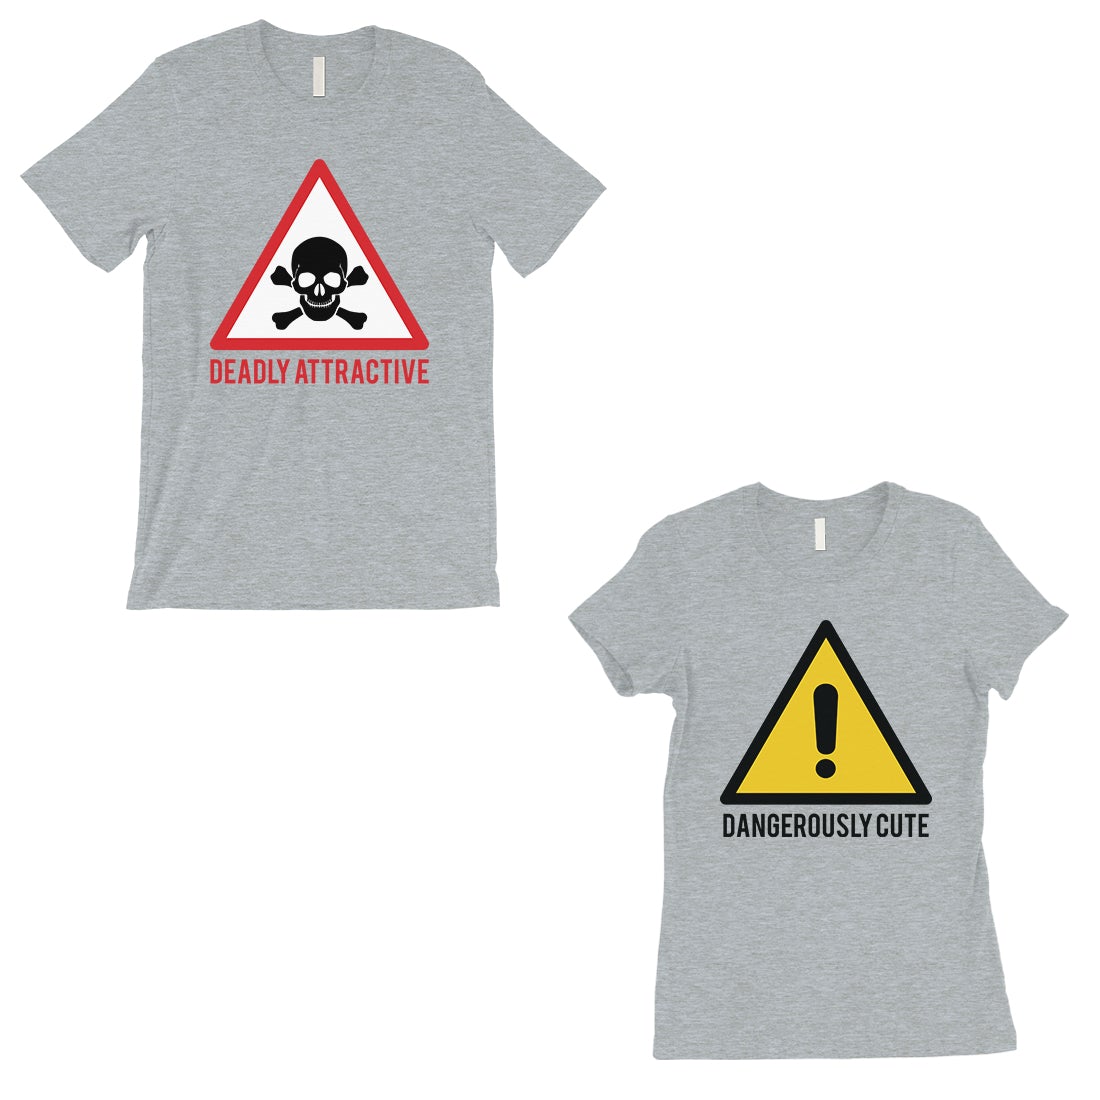 Attractive & Cute Couples Matching T-Shirts Grey Funny Gift For Him